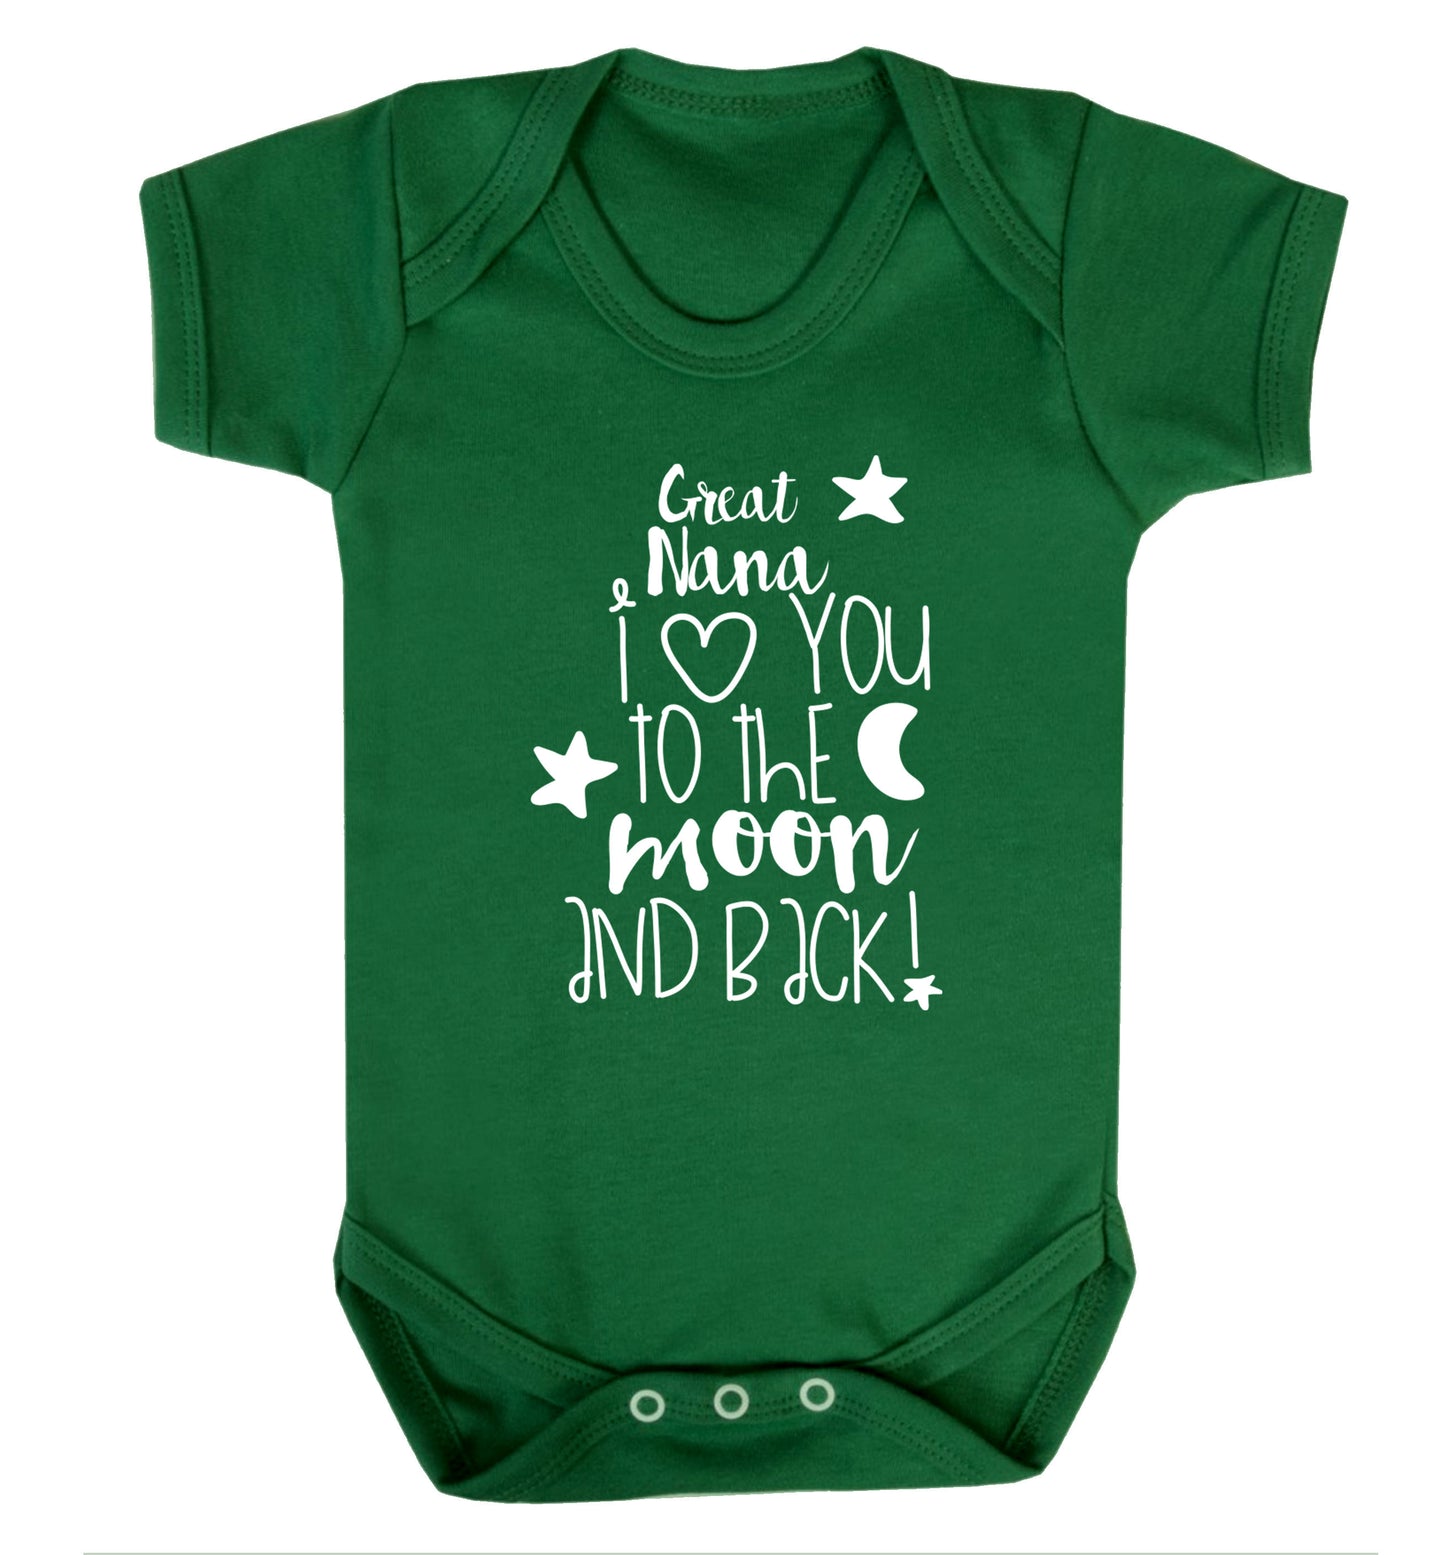 Great Nana I love you to the moon and back Baby Vest green 18-24 months